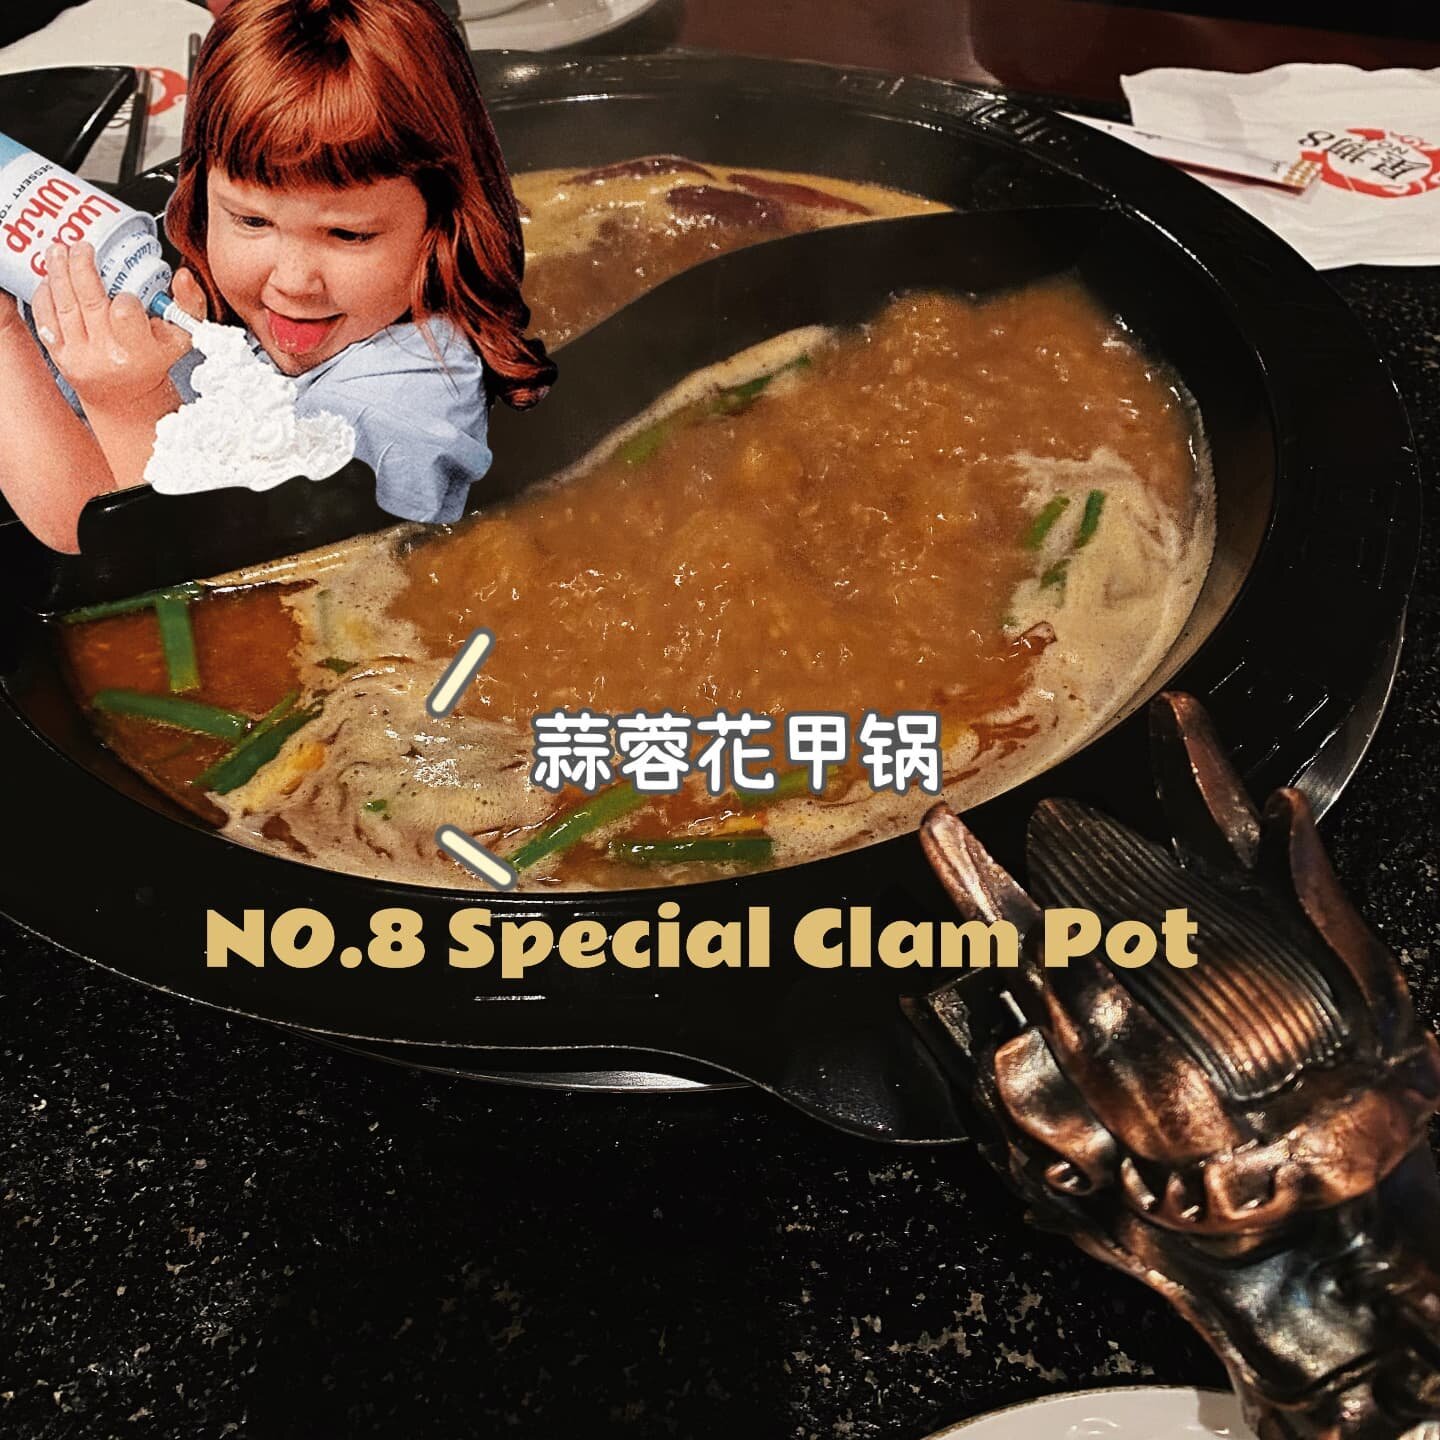 🥘 Special Clam Pot
Has hotpot season started yet？
.
.
.
.
#manchesterfoodie 
#manchesterfood 
#no8hotpot